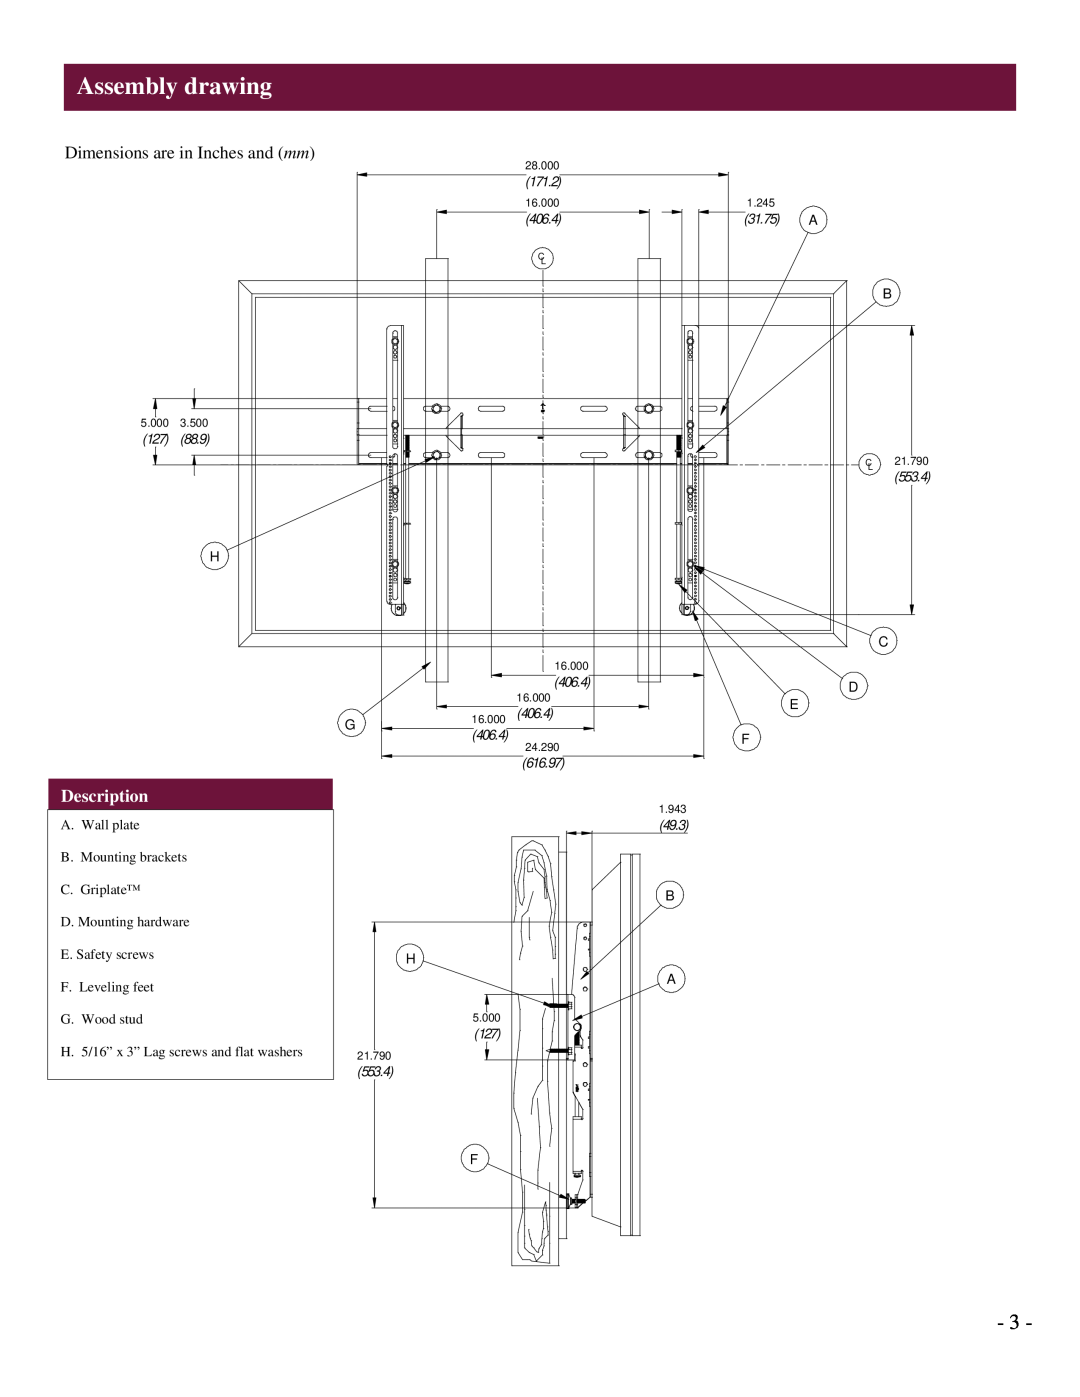 Premier Mounts UFM Assembly drawing, Dimensions are in Inches and mm, Description, 28.000, 171.2, 16.000, 1.245, 406.4 